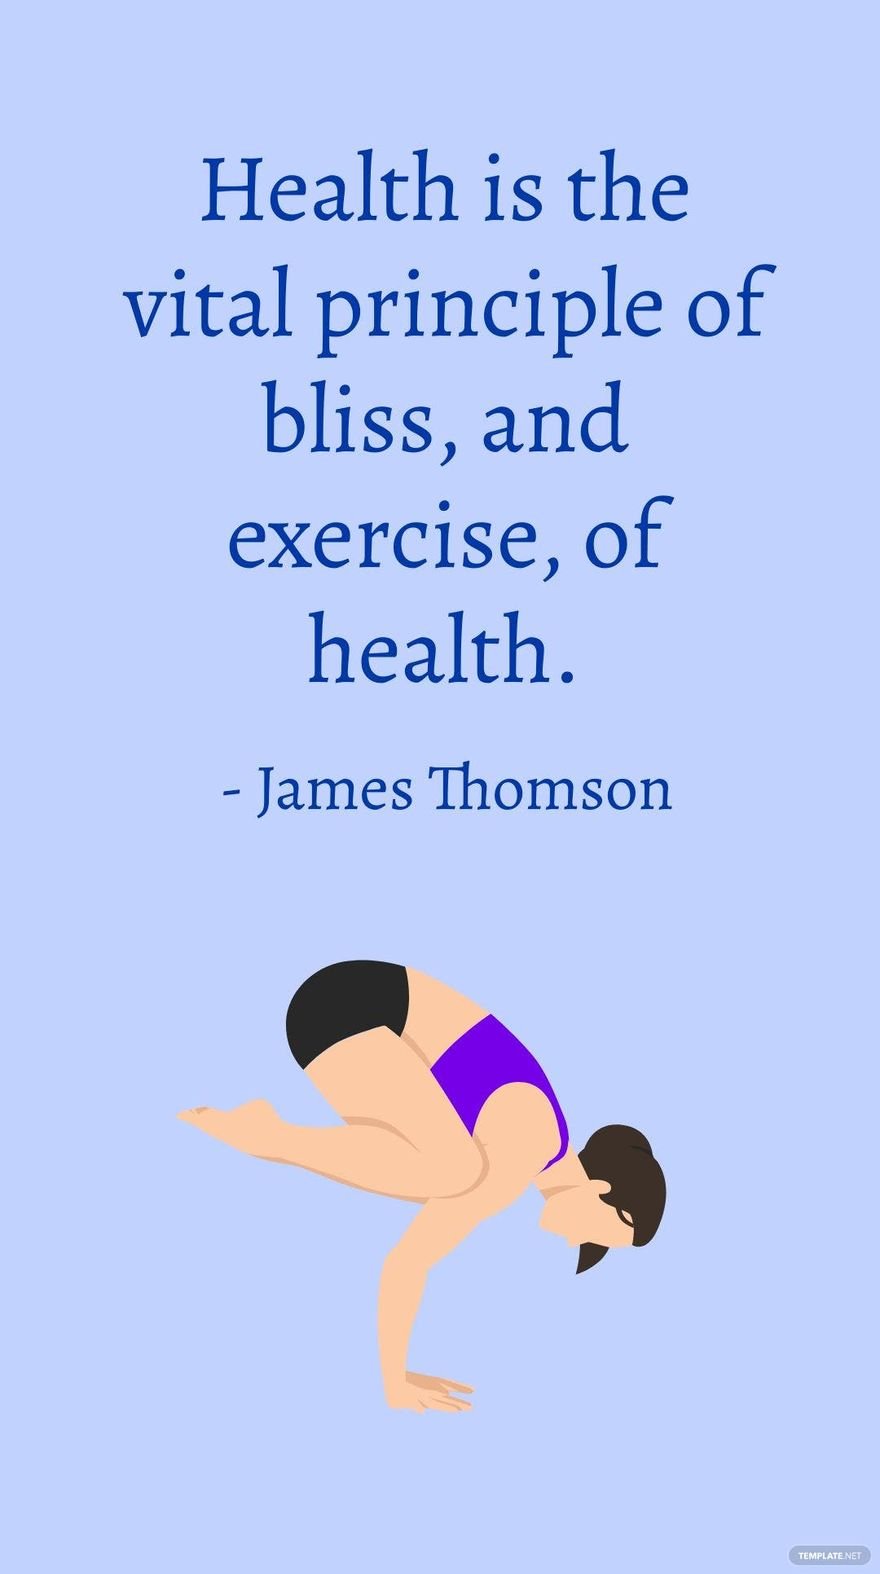 James Thomson - Health is the vital principle of bliss, and exercise, of health. - James Thomson